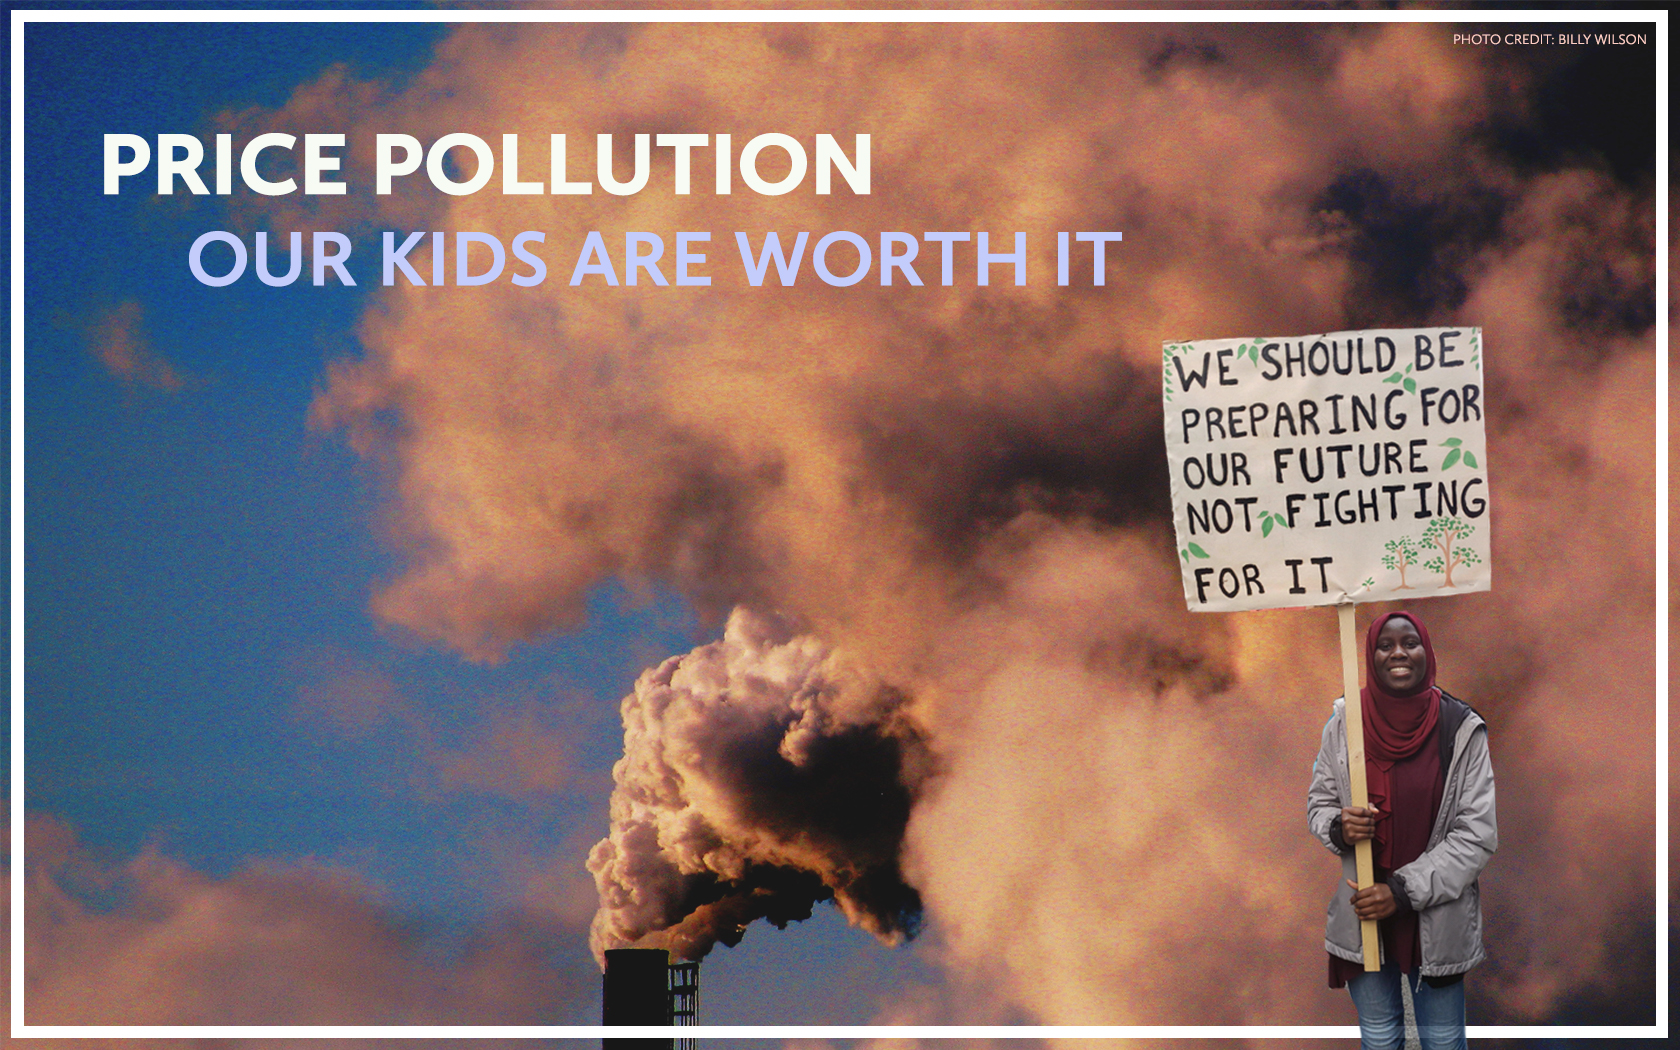 Price pollution: Our kids are worth it (Background photo: Billy Wilson via Flickr)